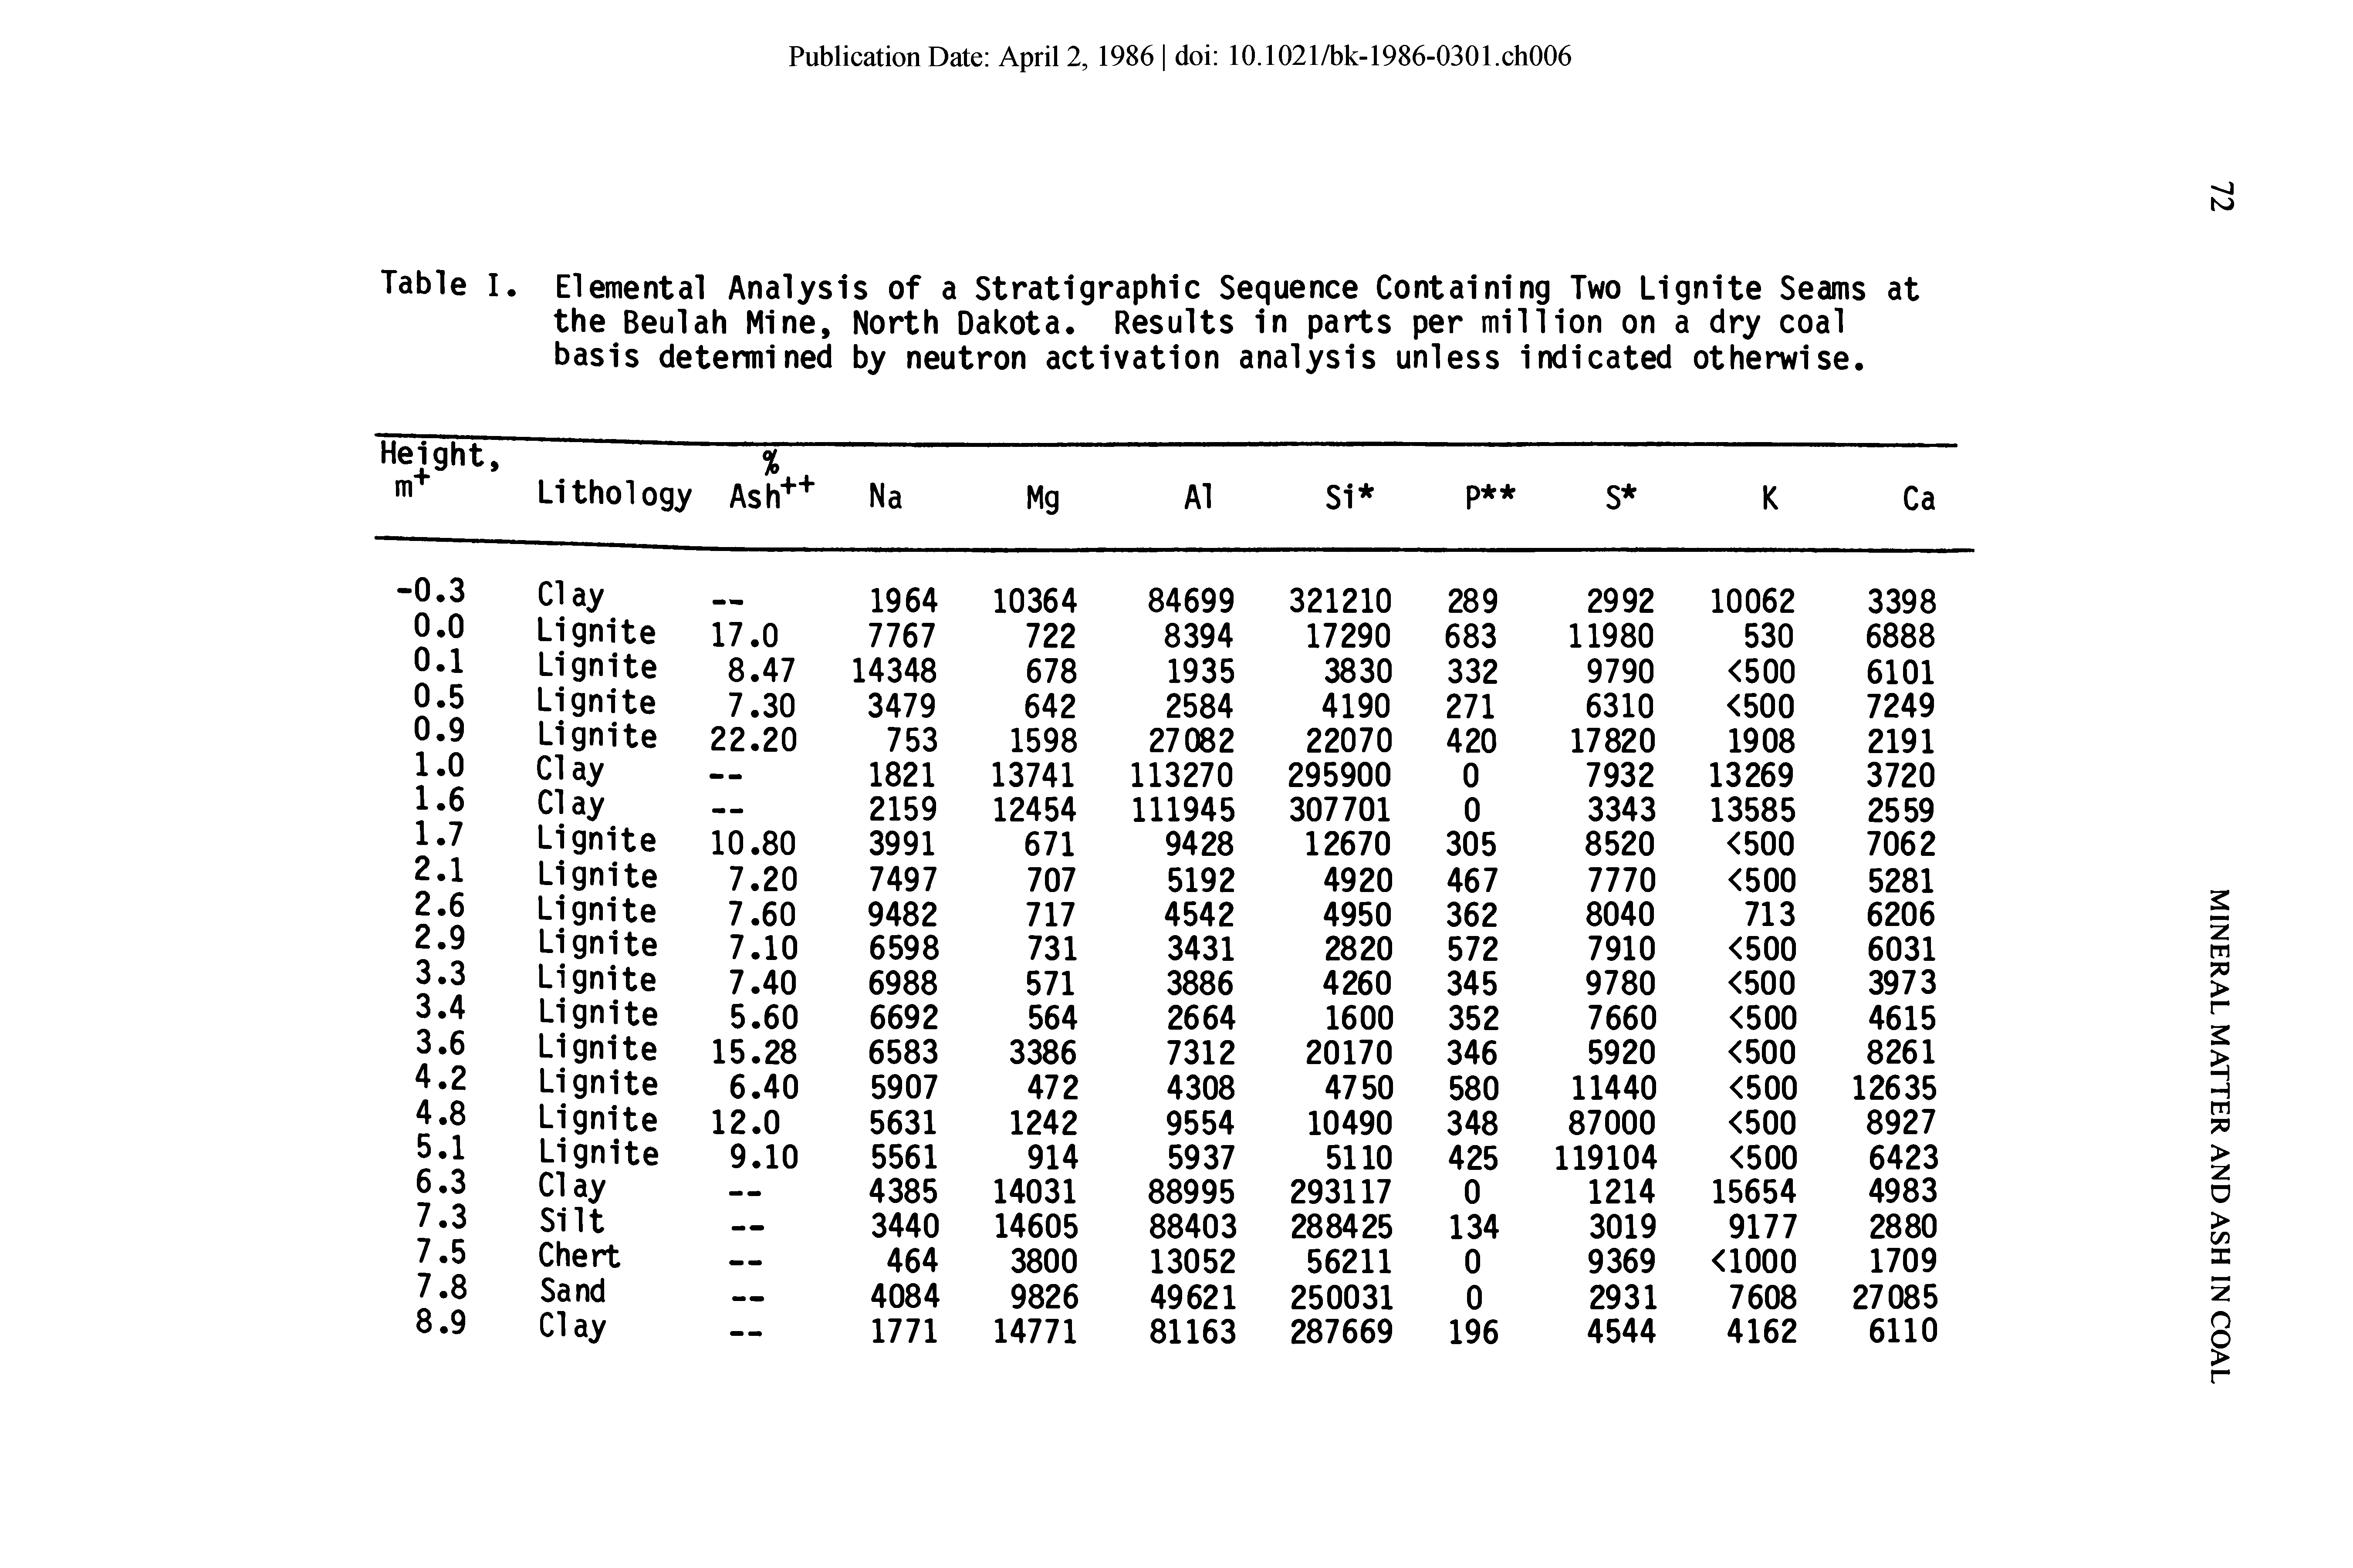 Table I. Elemental Analysis of a Stratigraphic Sequence Containing Two Lignite Seams at the Beulah Mine, North Dakota. Results in parts per million on a dry coal basis determined by neutron activation analysis unless indicated otherwise.